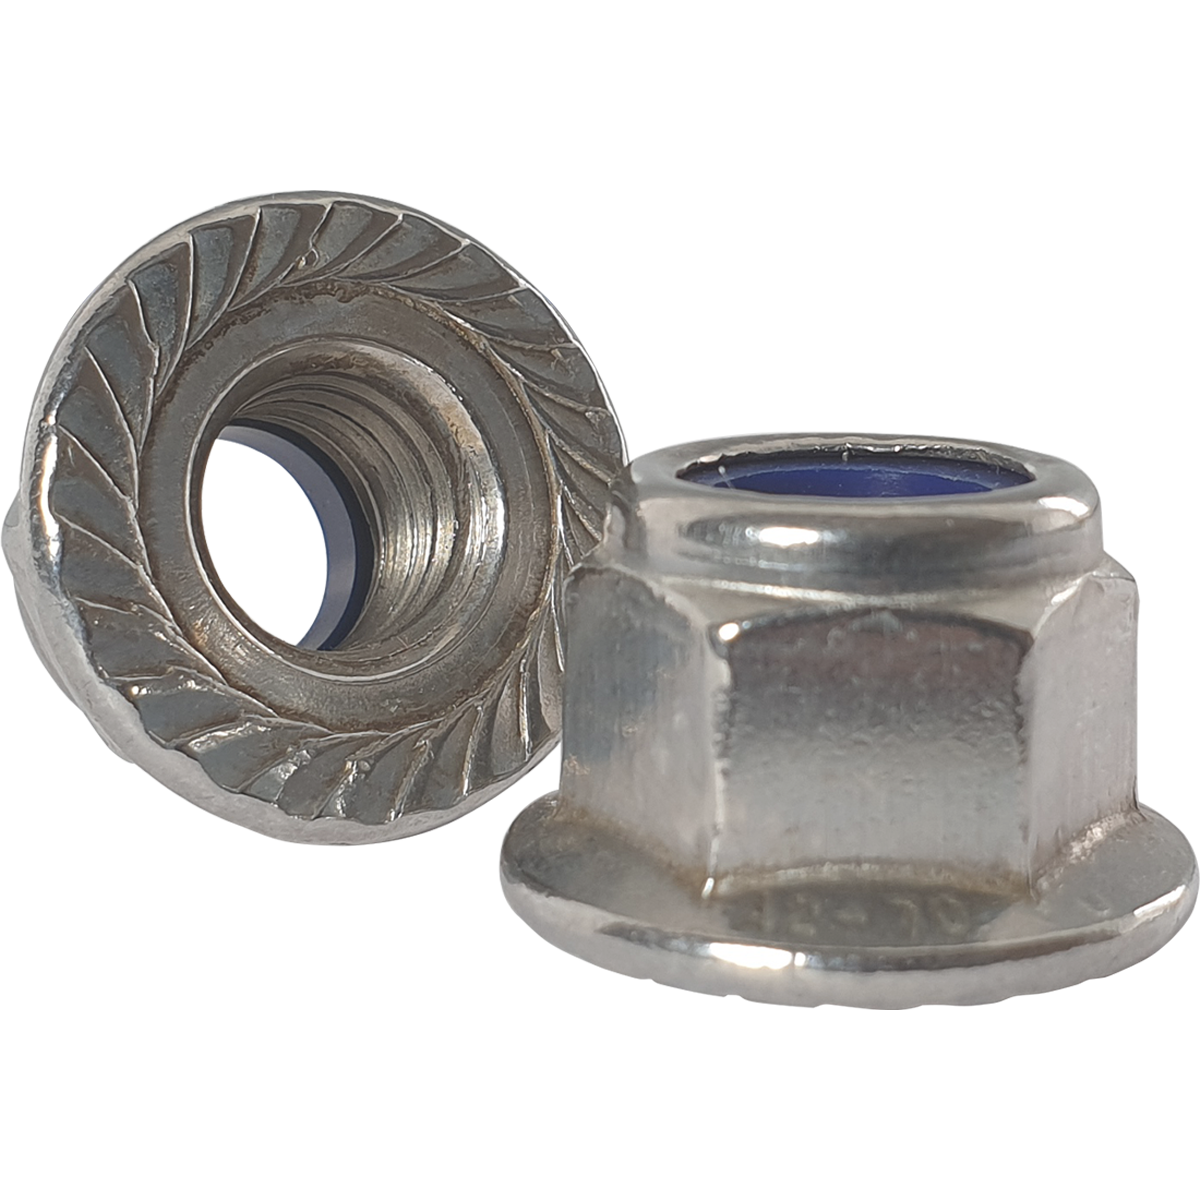 Flanged nylon insert nuts, also known as a nyloc flange nuts.